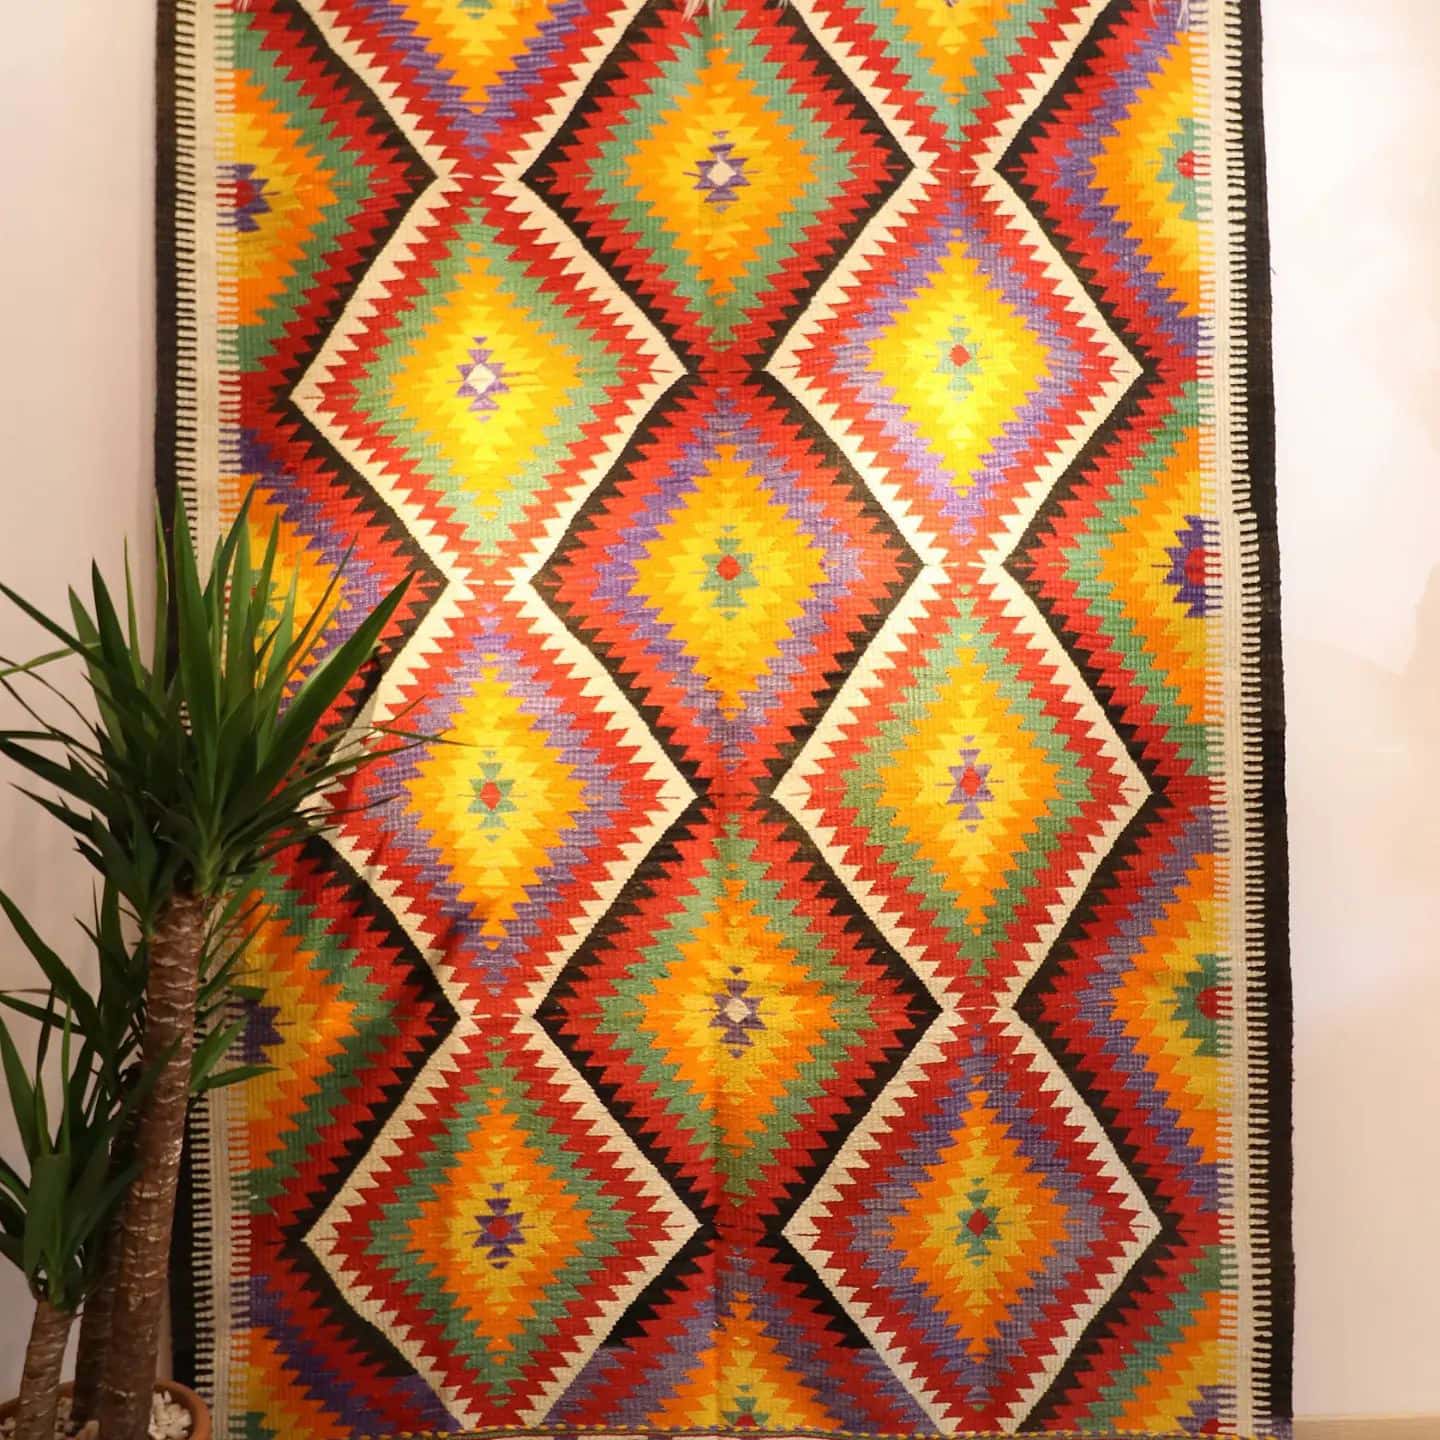 vintage turkish hand-knotted contemporary flat-weave rug in colorful diamond patterns